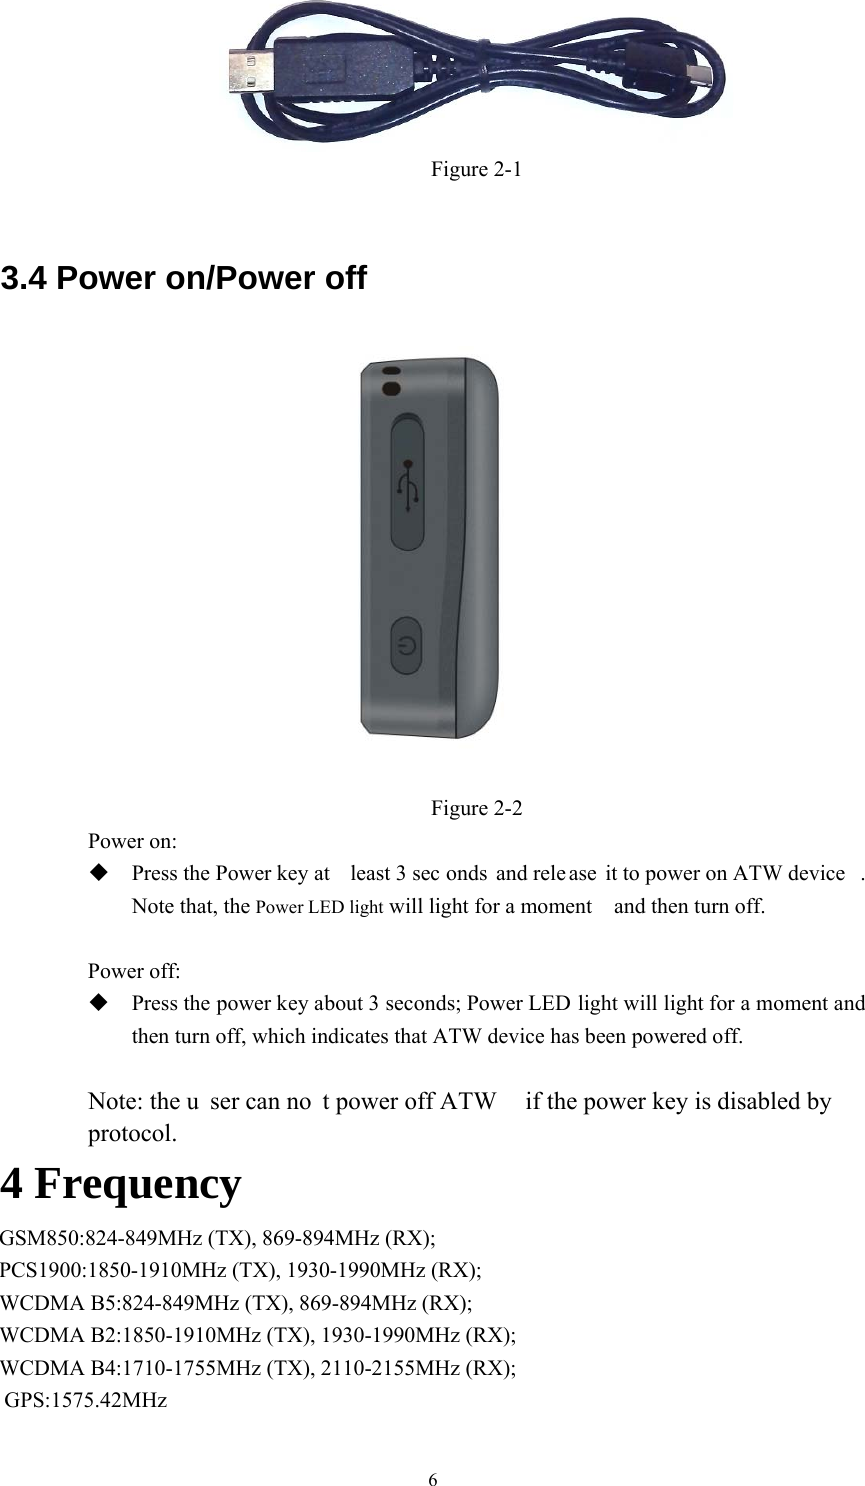 6Figure 2-1 3.4 Power on/Power off Figure 2-2 Power on:   Press the Power key at  least 3 sec onds and rele ase it to power on ATW device .Note that, the Power LED light will light for a moment    and then turn off.Power off: Press the power key about 3 seconds; Power LED light will light for a moment andthen turn off, which indicates that ATW device has been powered off.Note: the u ser can no t power off ATW  if the power key is disabled by protocol.  4 Frequency GSM850:824-849MHz (TX), 869-894MHz (RX); PCS1900:1850-1910MHz (TX), 1930-1990MHz (RX); WCDMA B5:824-849MHz (TX), 869-894MHz (RX); WCDMA B2:1850-1910MHz (TX), 1930-1990MHz (RX); WCDMA B4:1710-1755MHz (TX), 2110-2155MHz (RX); GPS:1575.42MHz 